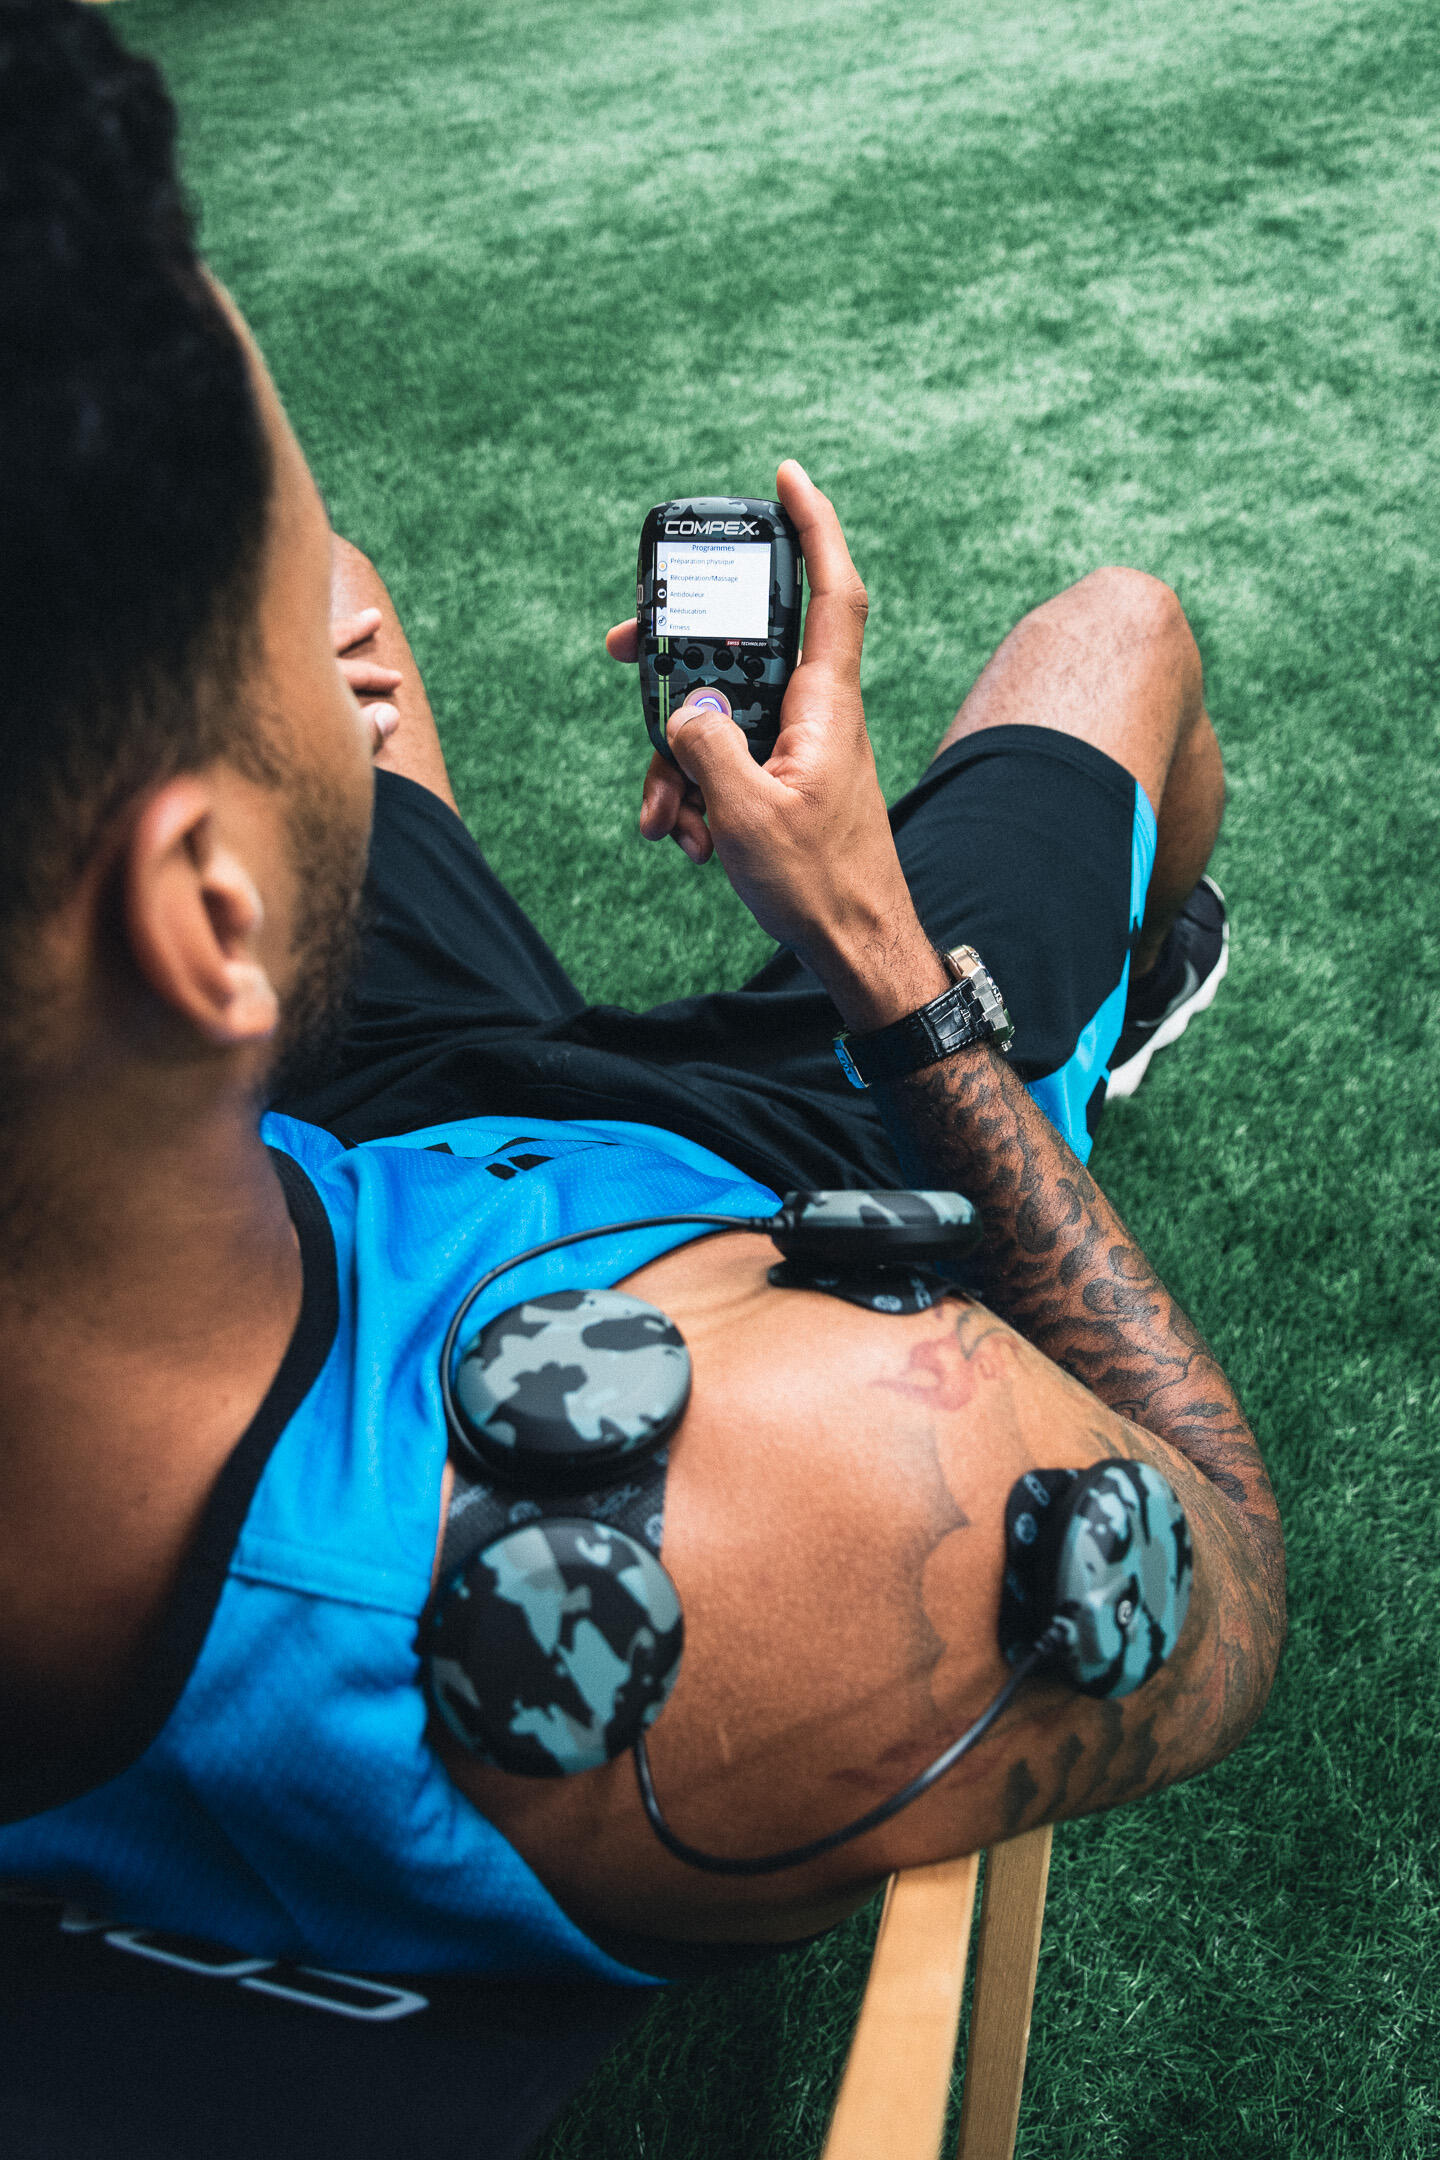 Compex SP 8.0 WOD Edition To Optimise Your Training 7/7